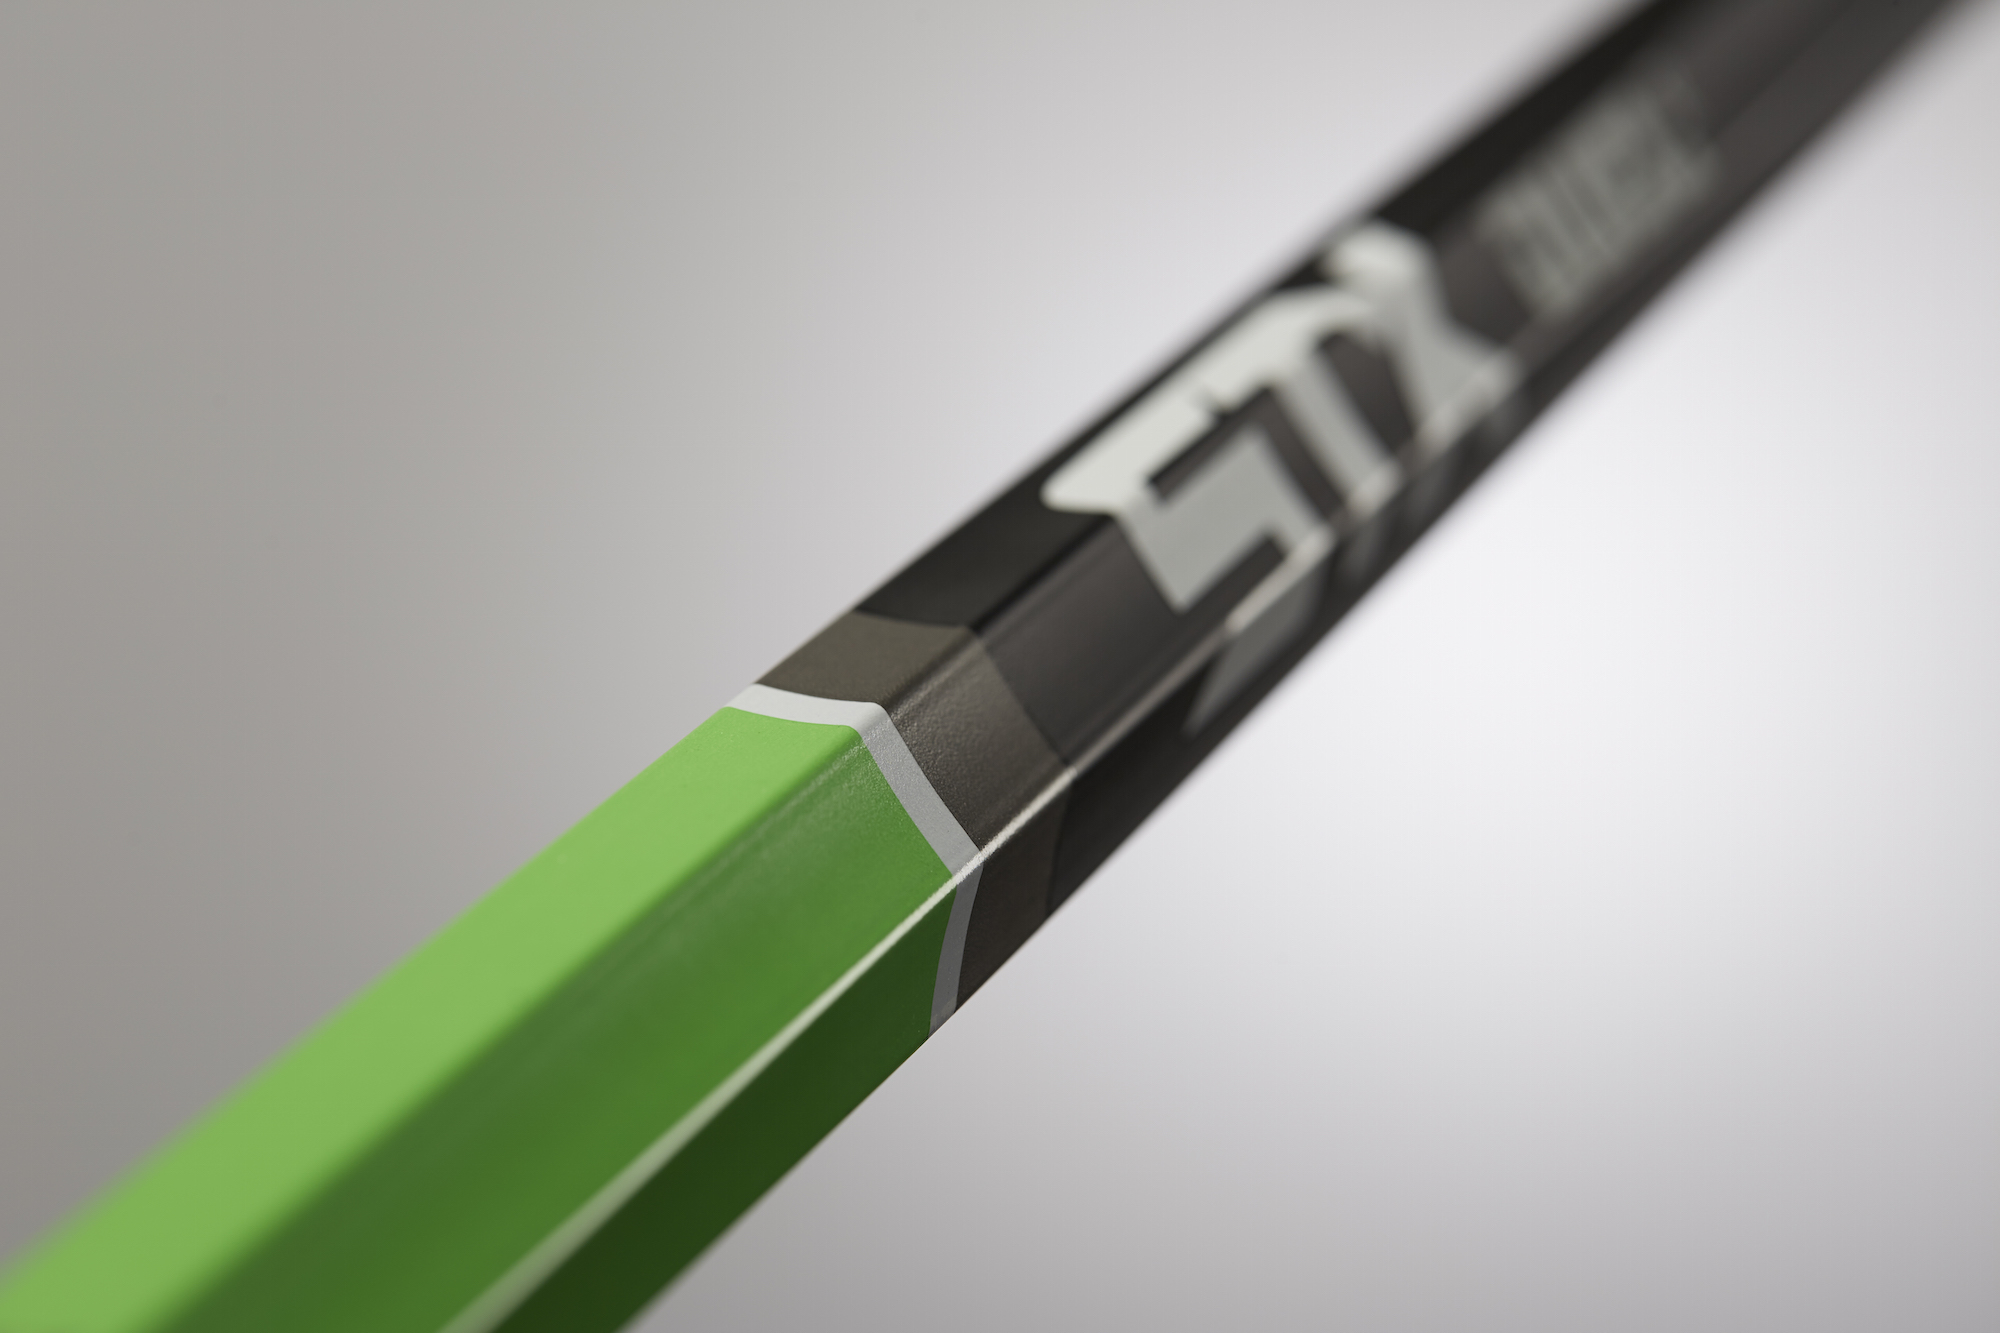 The technology incorporated within the Duel handle is designed to maximize performance during faceoffs.